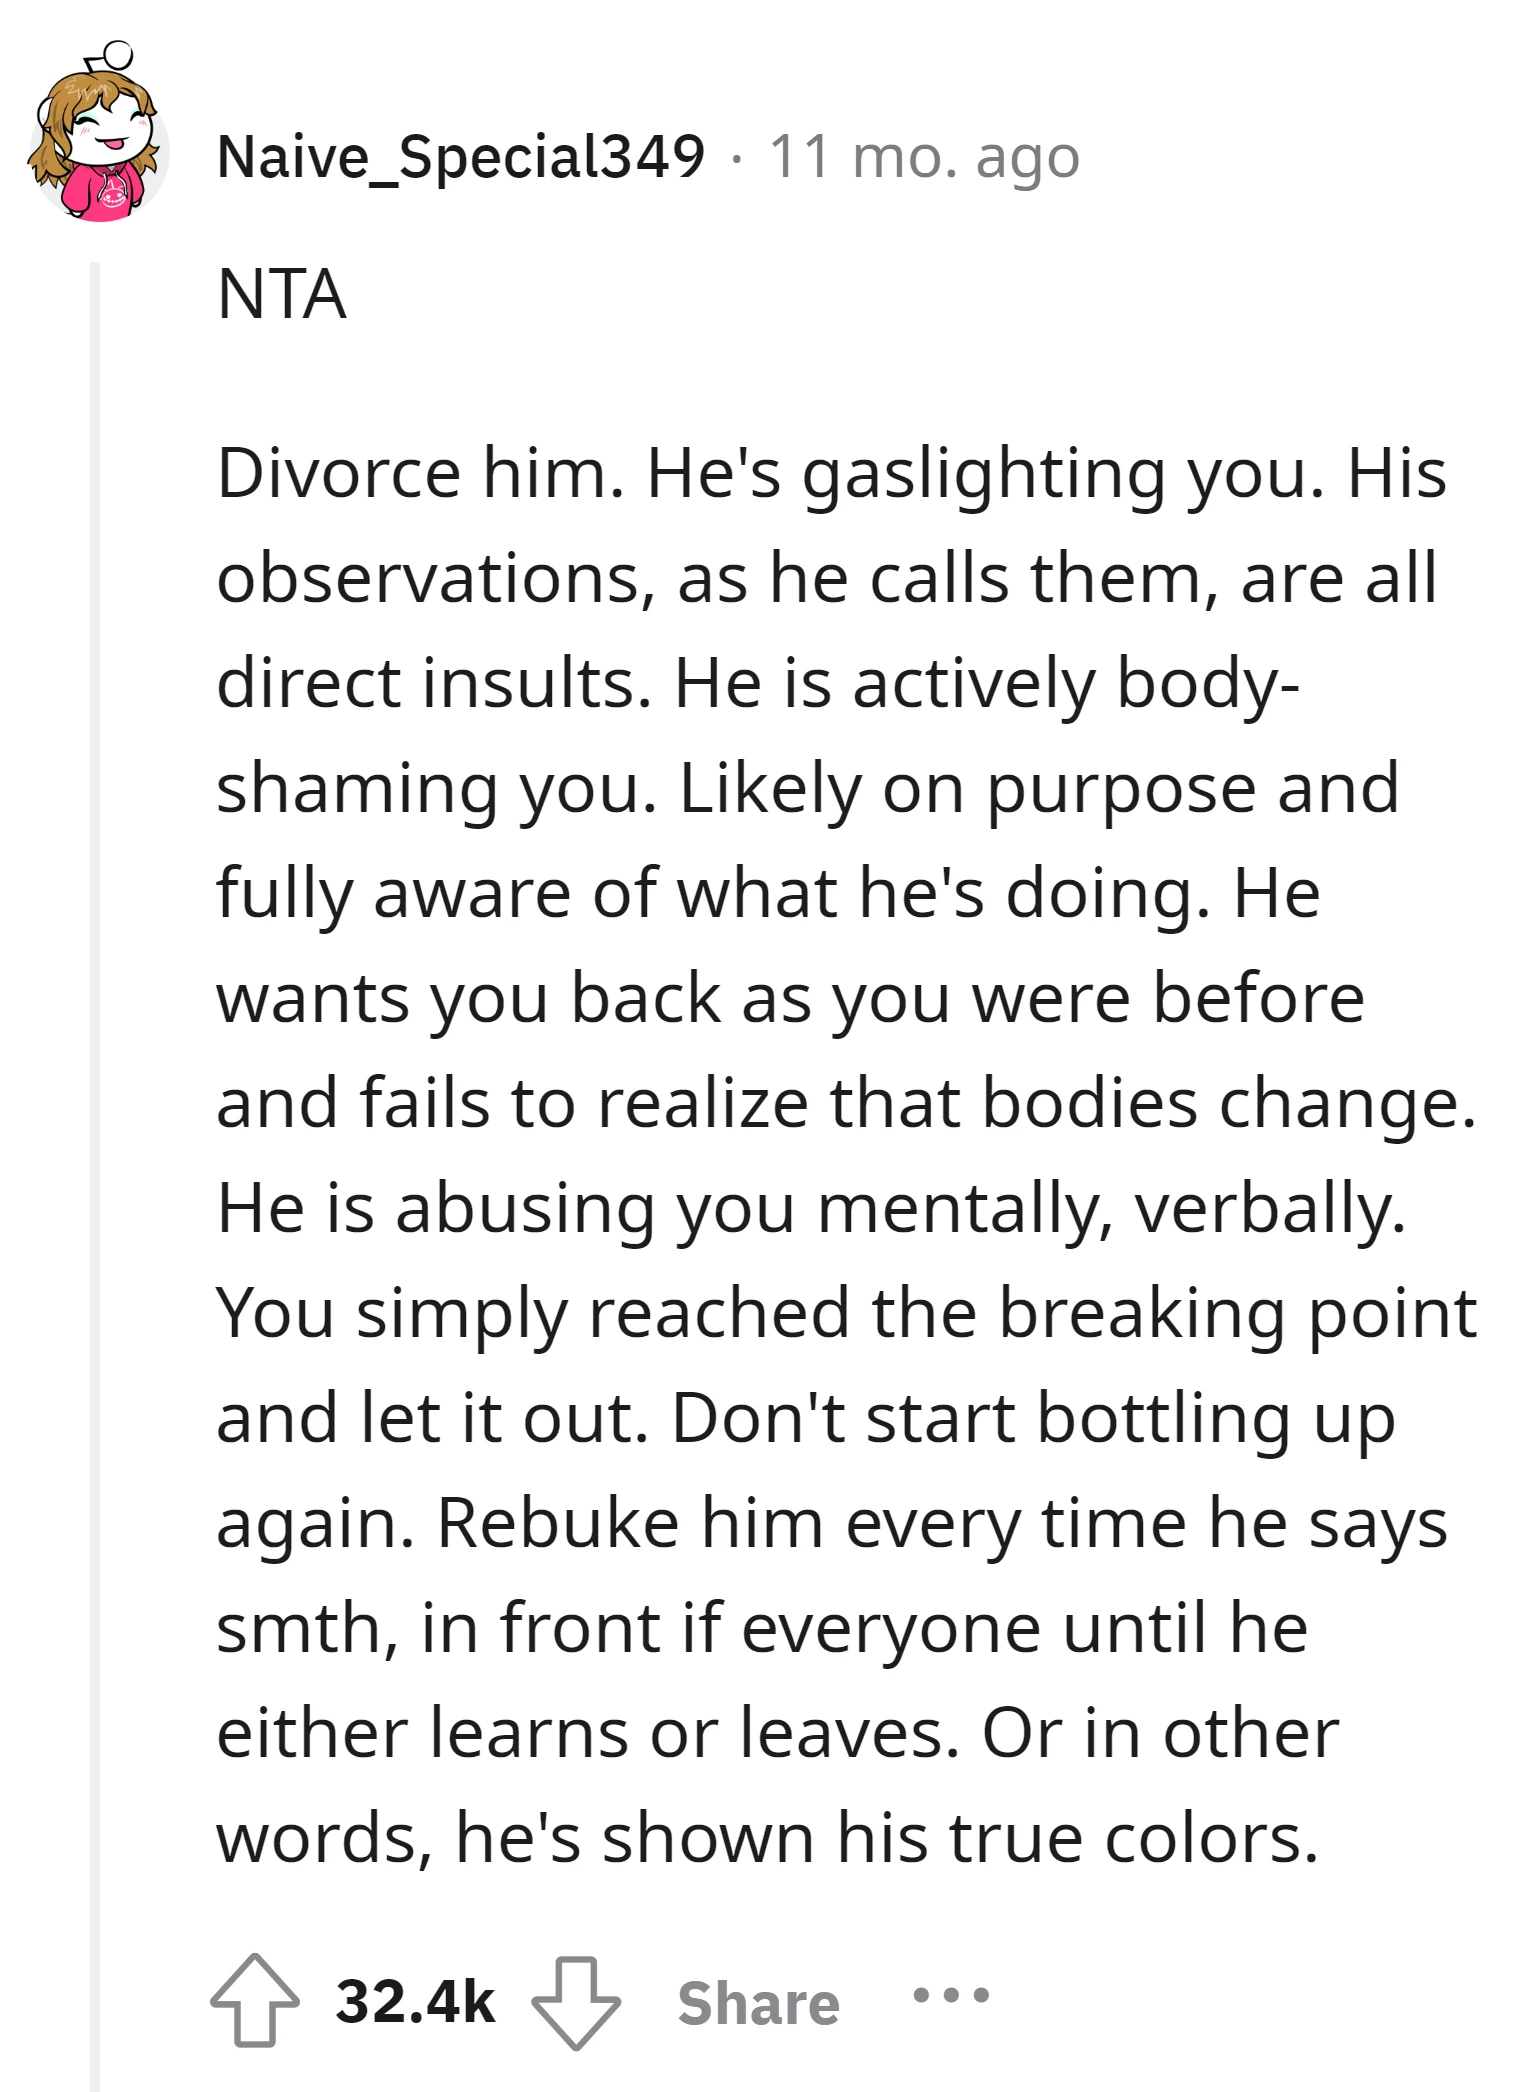 The commenter advises the OP to consider divorce